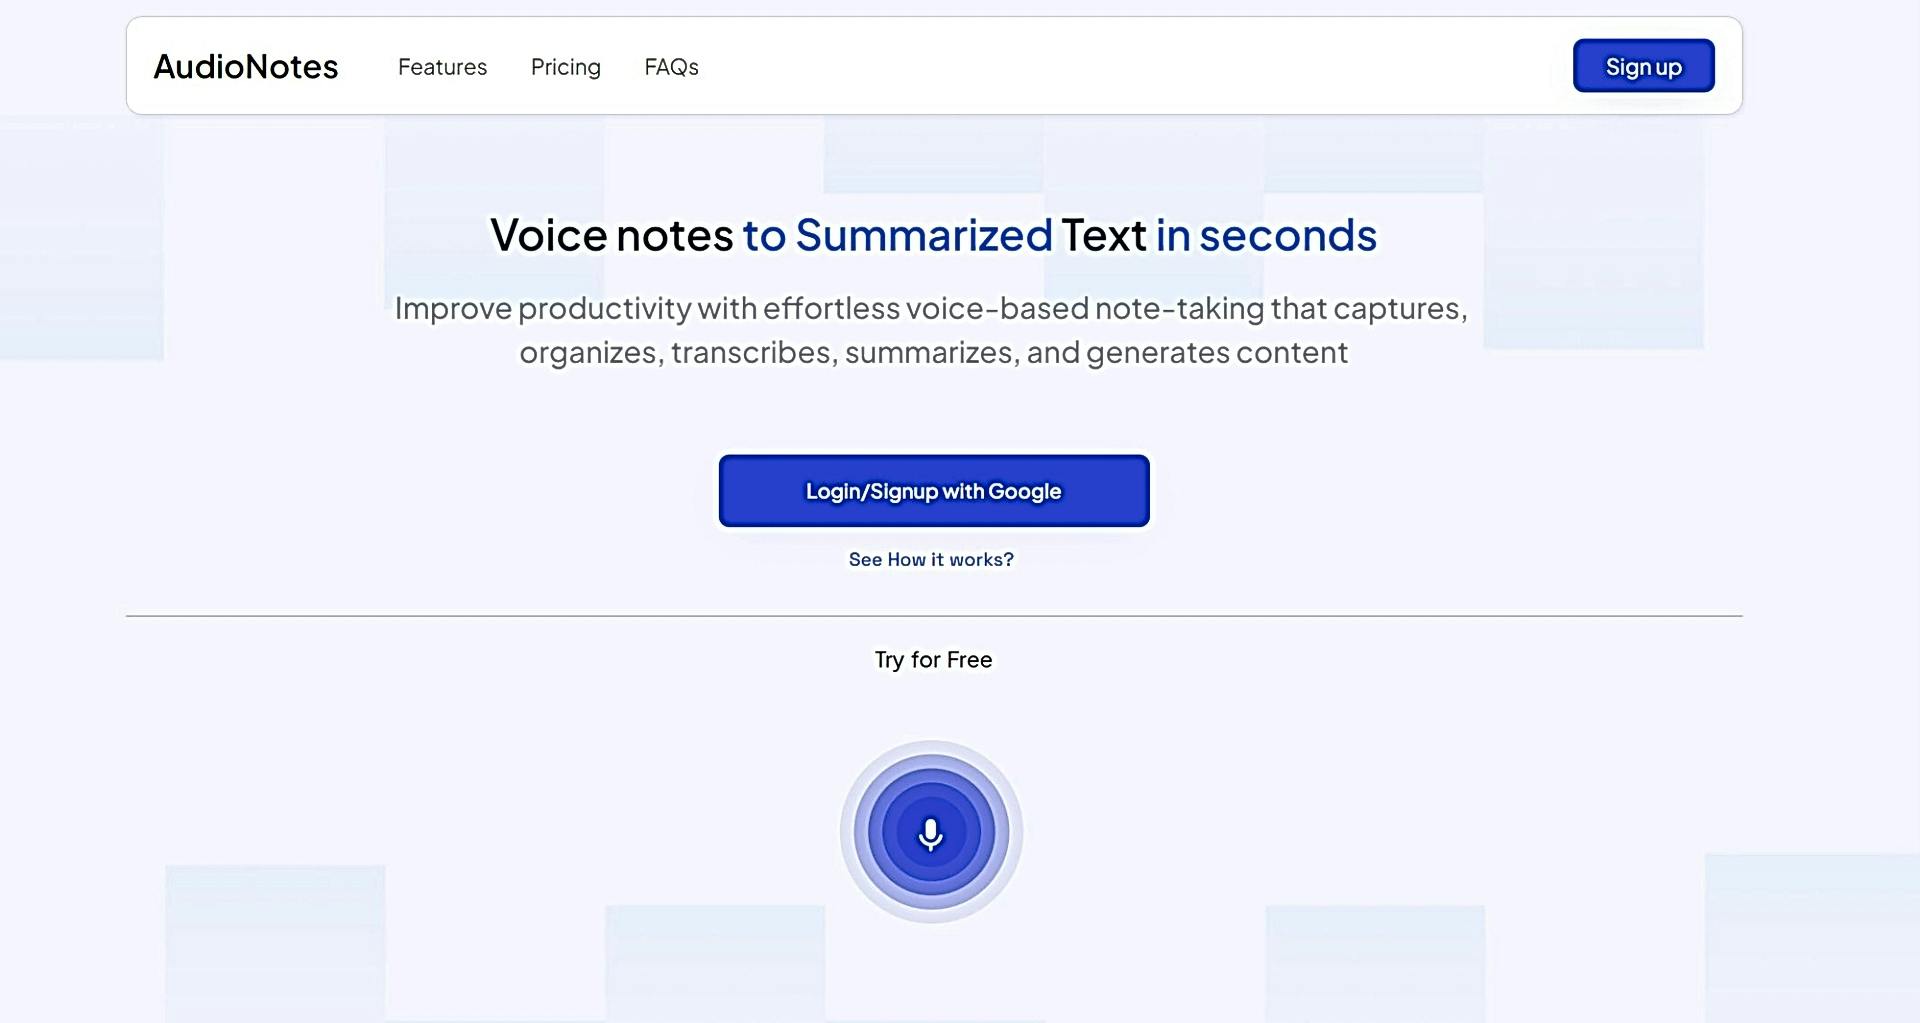 AudioNotes featured